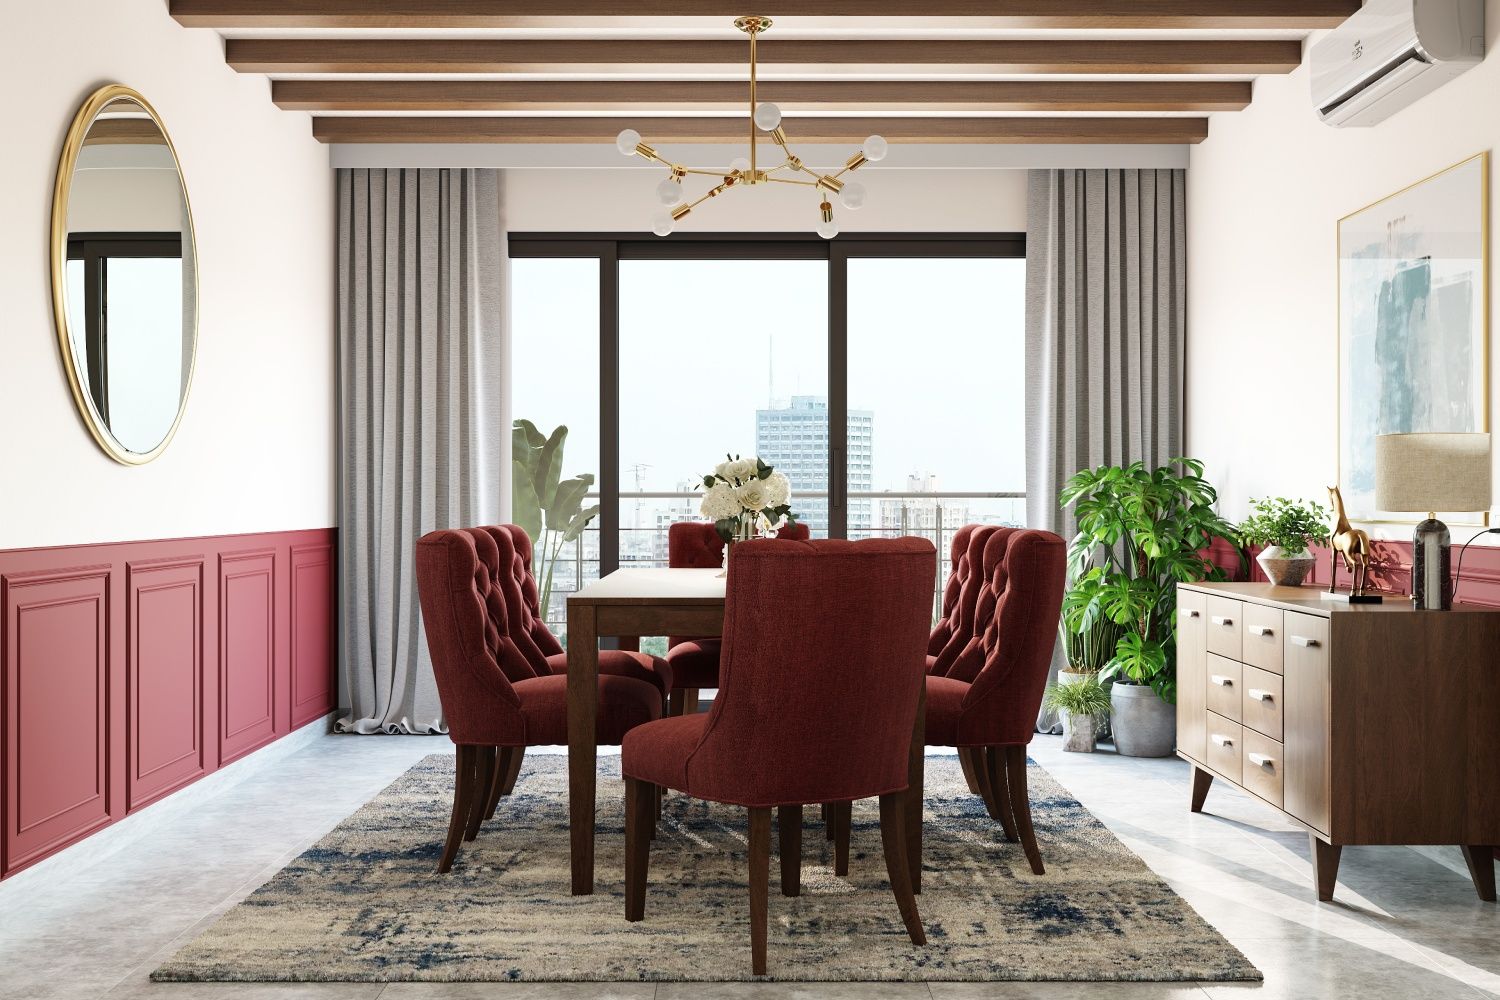 Modern Classic Wooden Dining Room Design For Six With Brick Red Upholstered Chairs